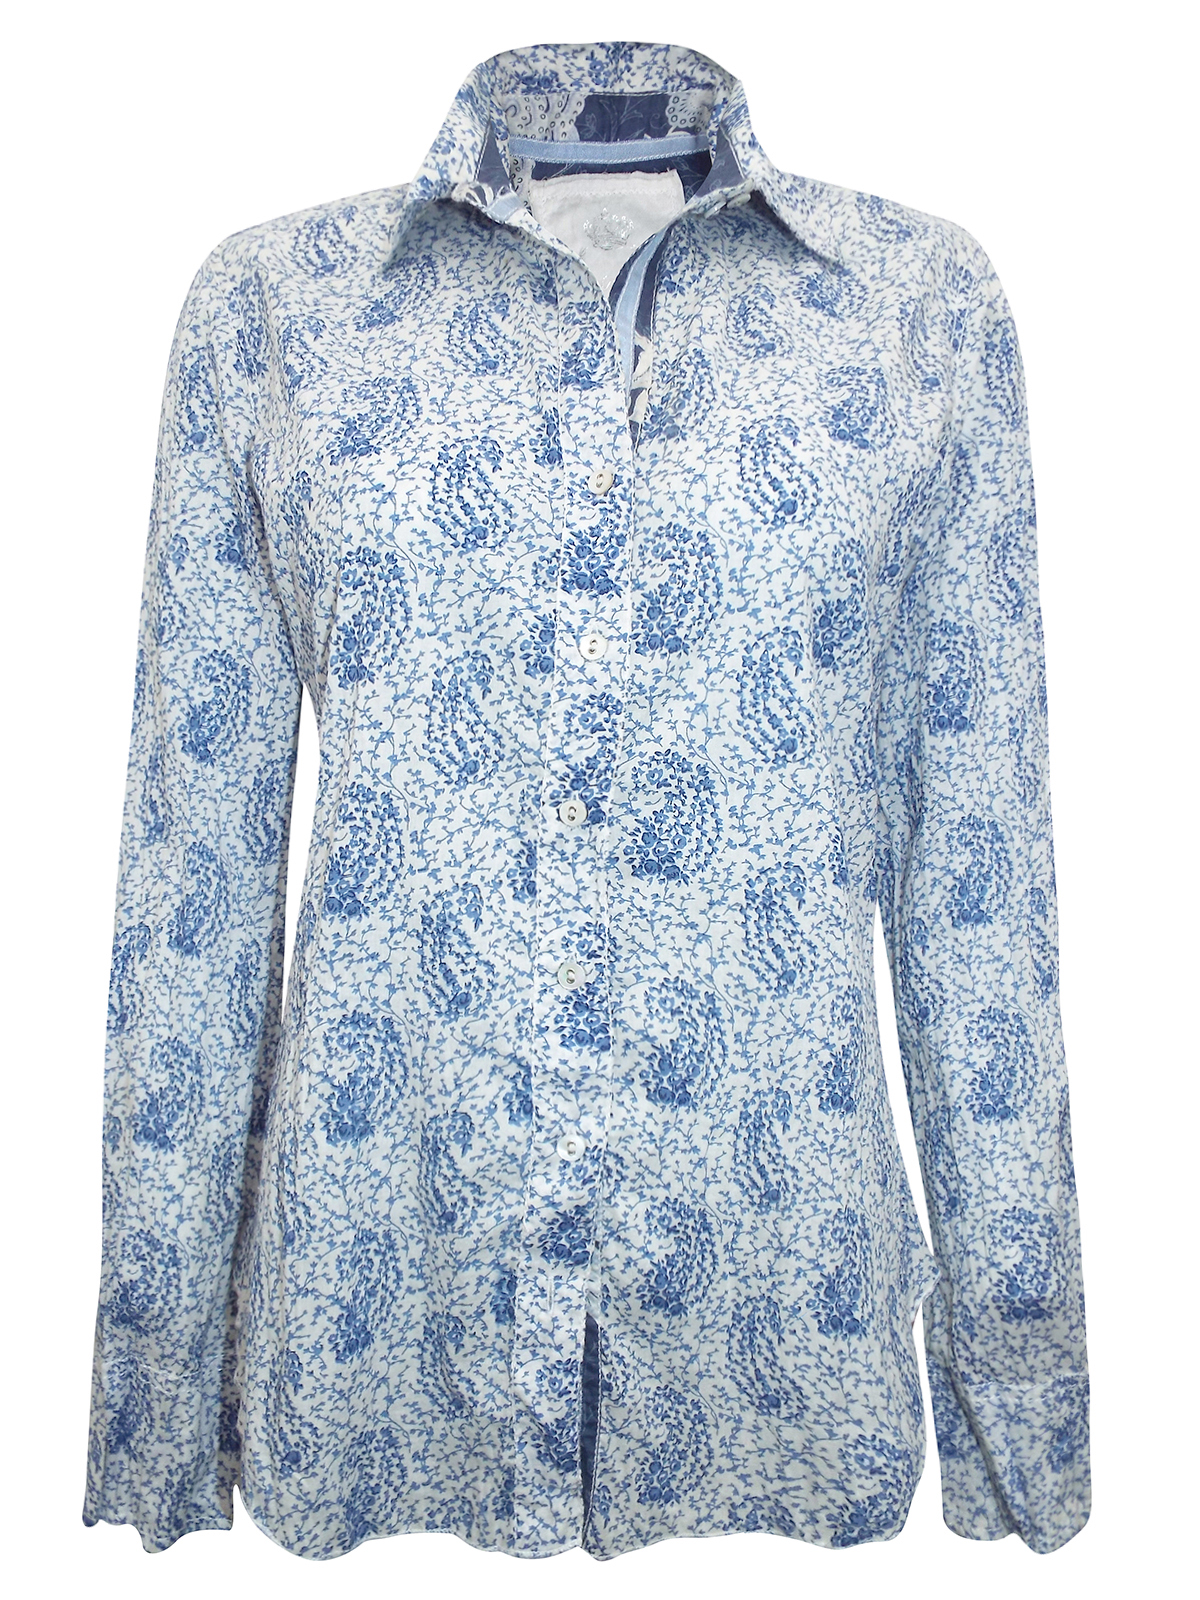 CINO - - CINO BLUE Floral Pure Cotton Crinkle Shirt - Size 8 to 18 (XXS ...